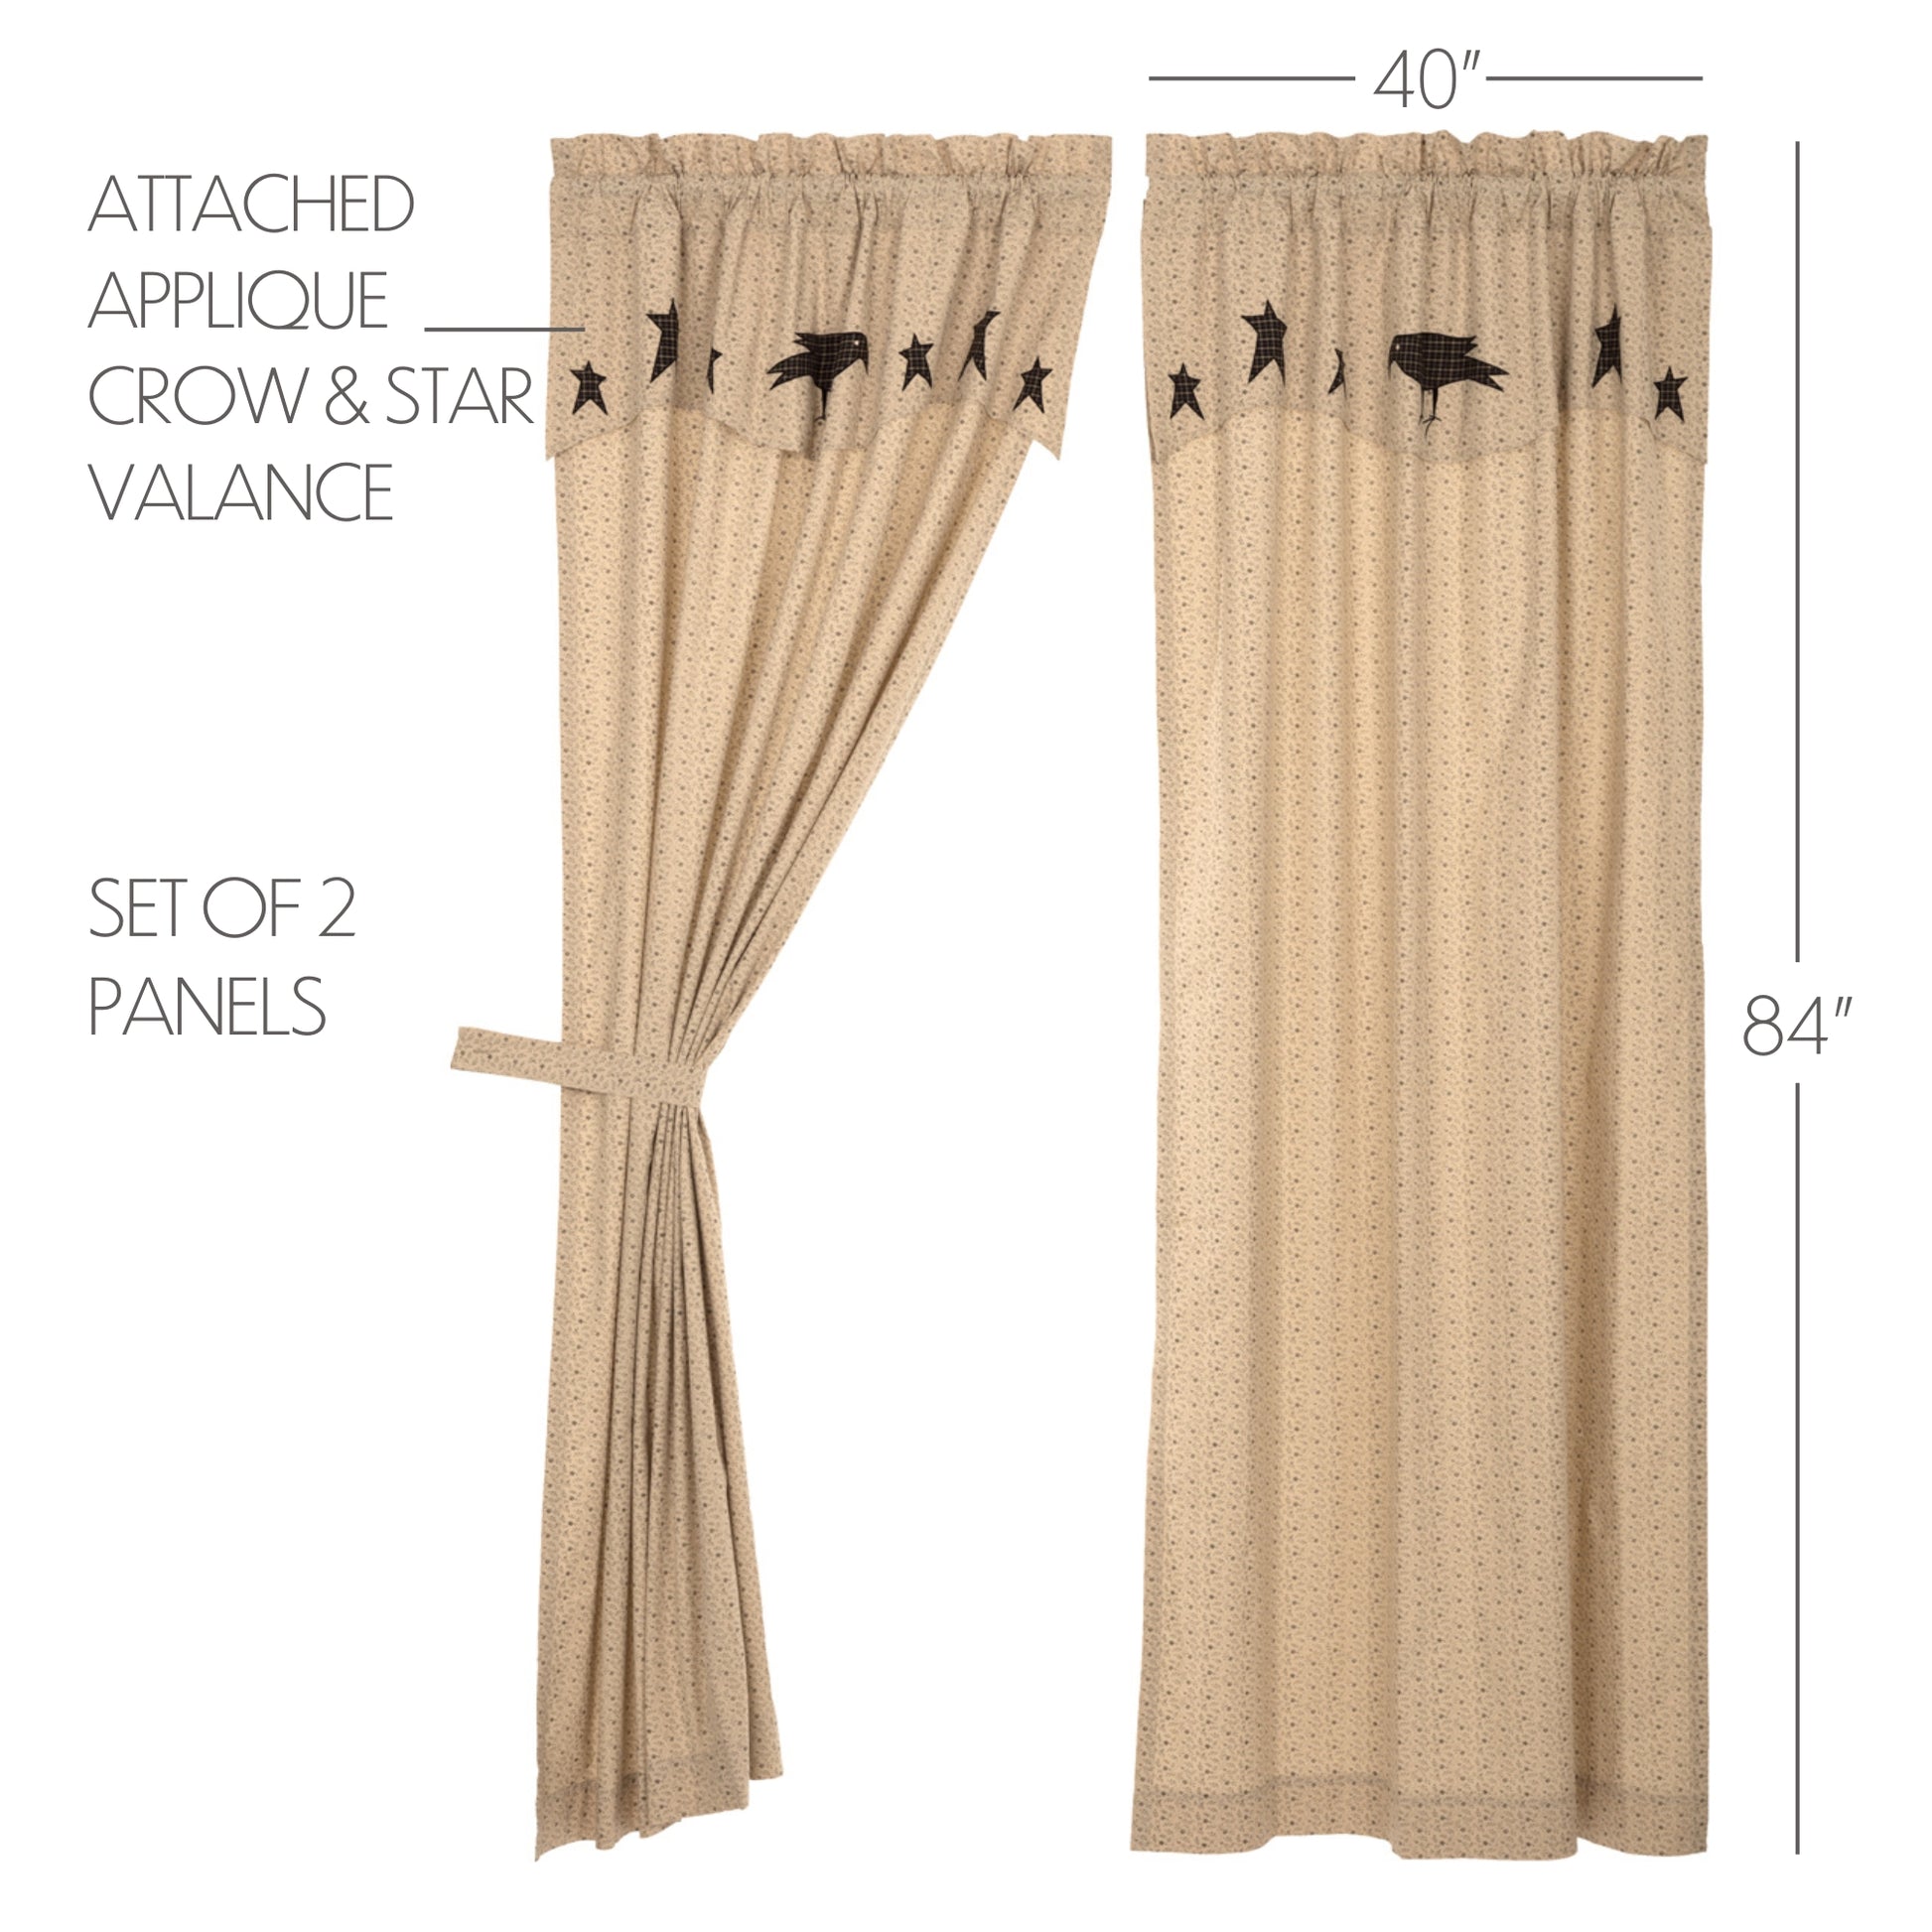 45791-Kettle-Grove-Panel-with-Attached-Applique-Crow-and-Star-Valance-Set-of-2-84x40-image-1